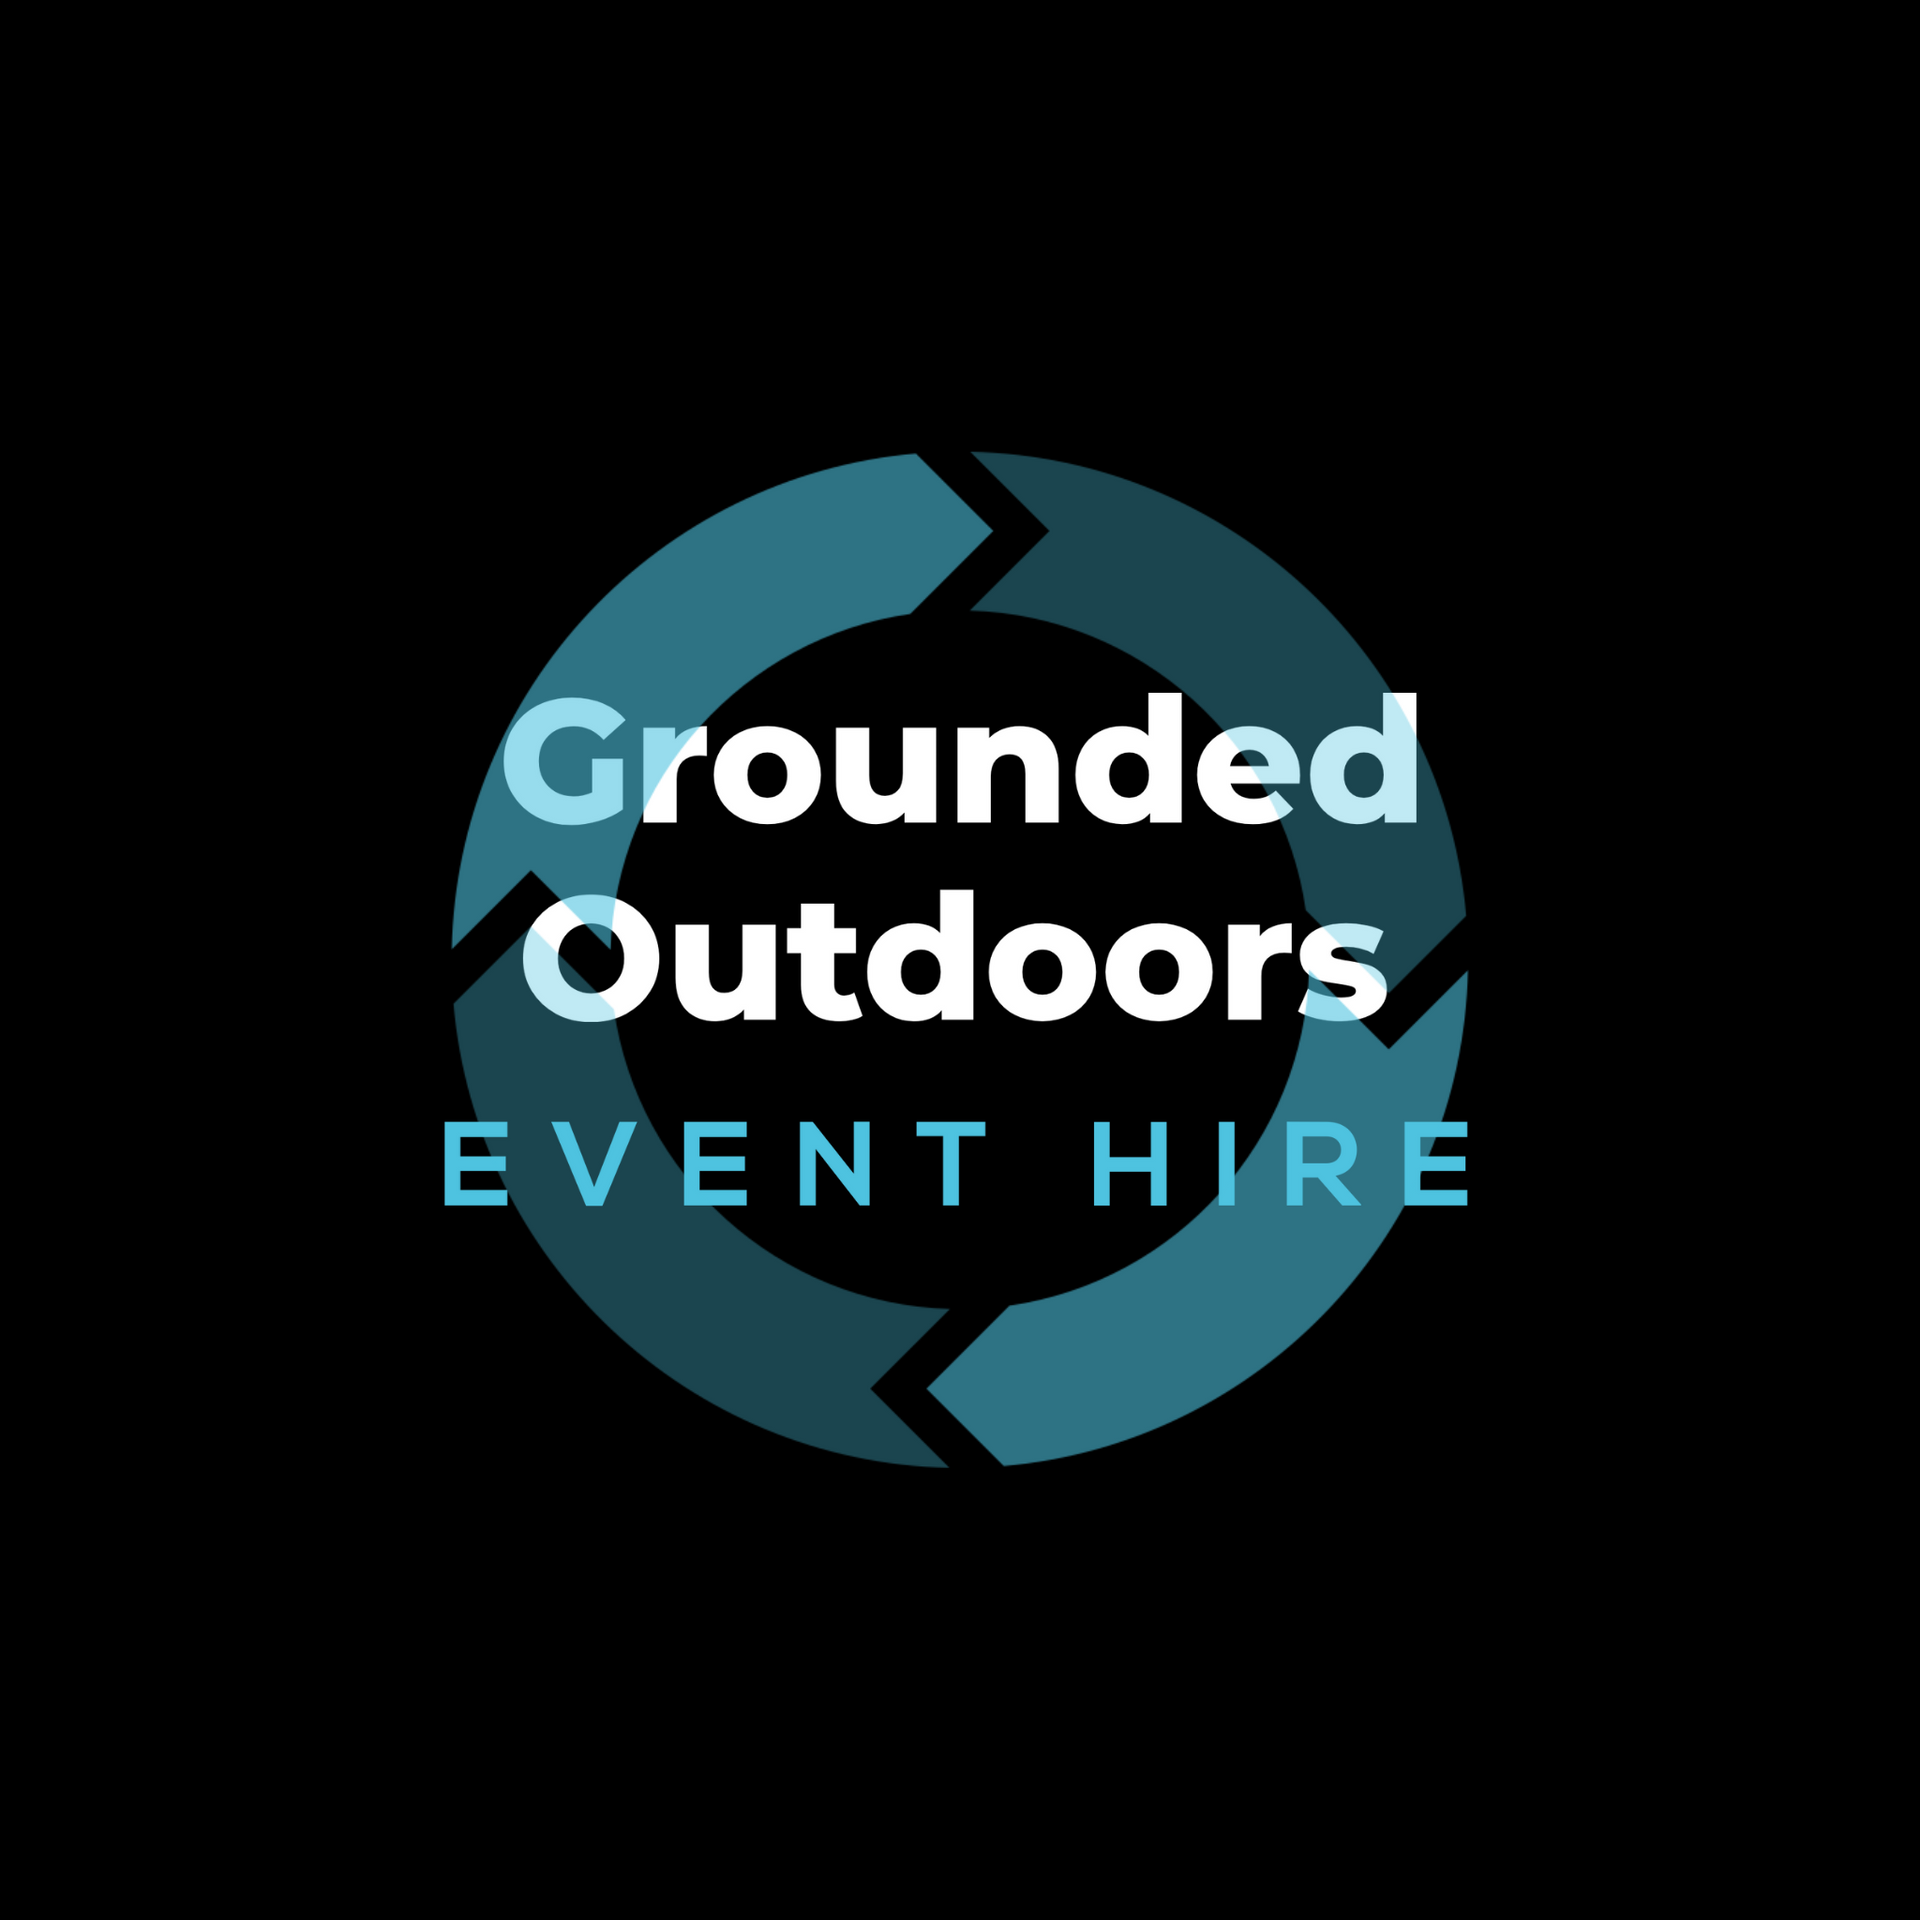 Grounded outdoors event hire wording logo with a blue circle logo on black background.
